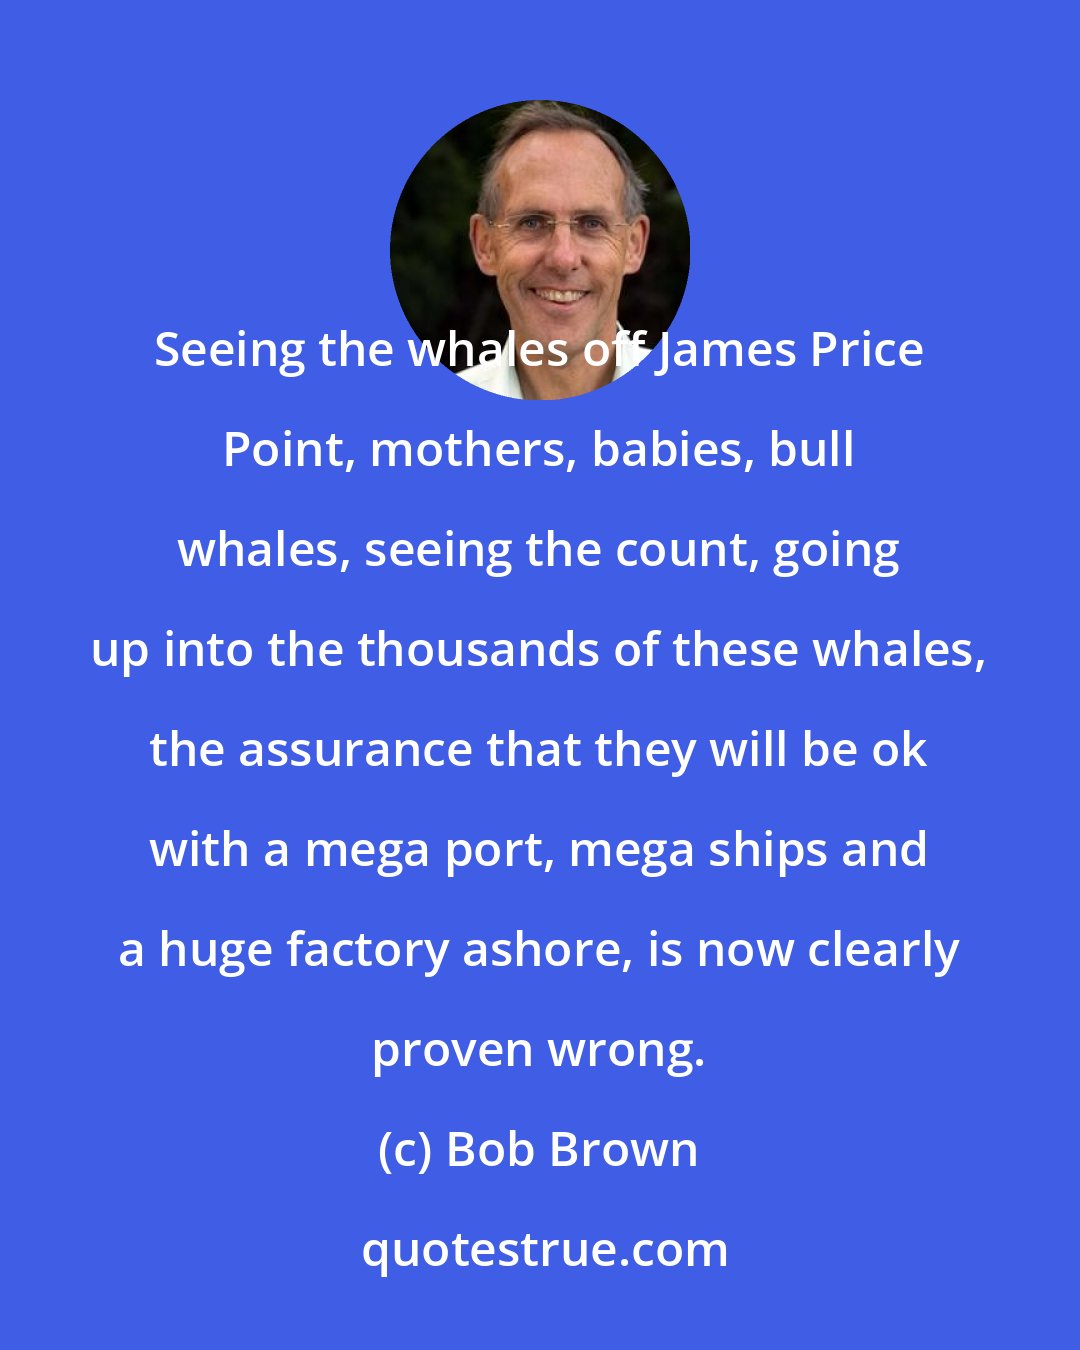 Bob Brown: Seeing the whales off James Price Point, mothers, babies, bull whales, seeing the count, going up into the thousands of these whales, the assurance that they will be ok with a mega port, mega ships and a huge factory ashore, is now clearly proven wrong.